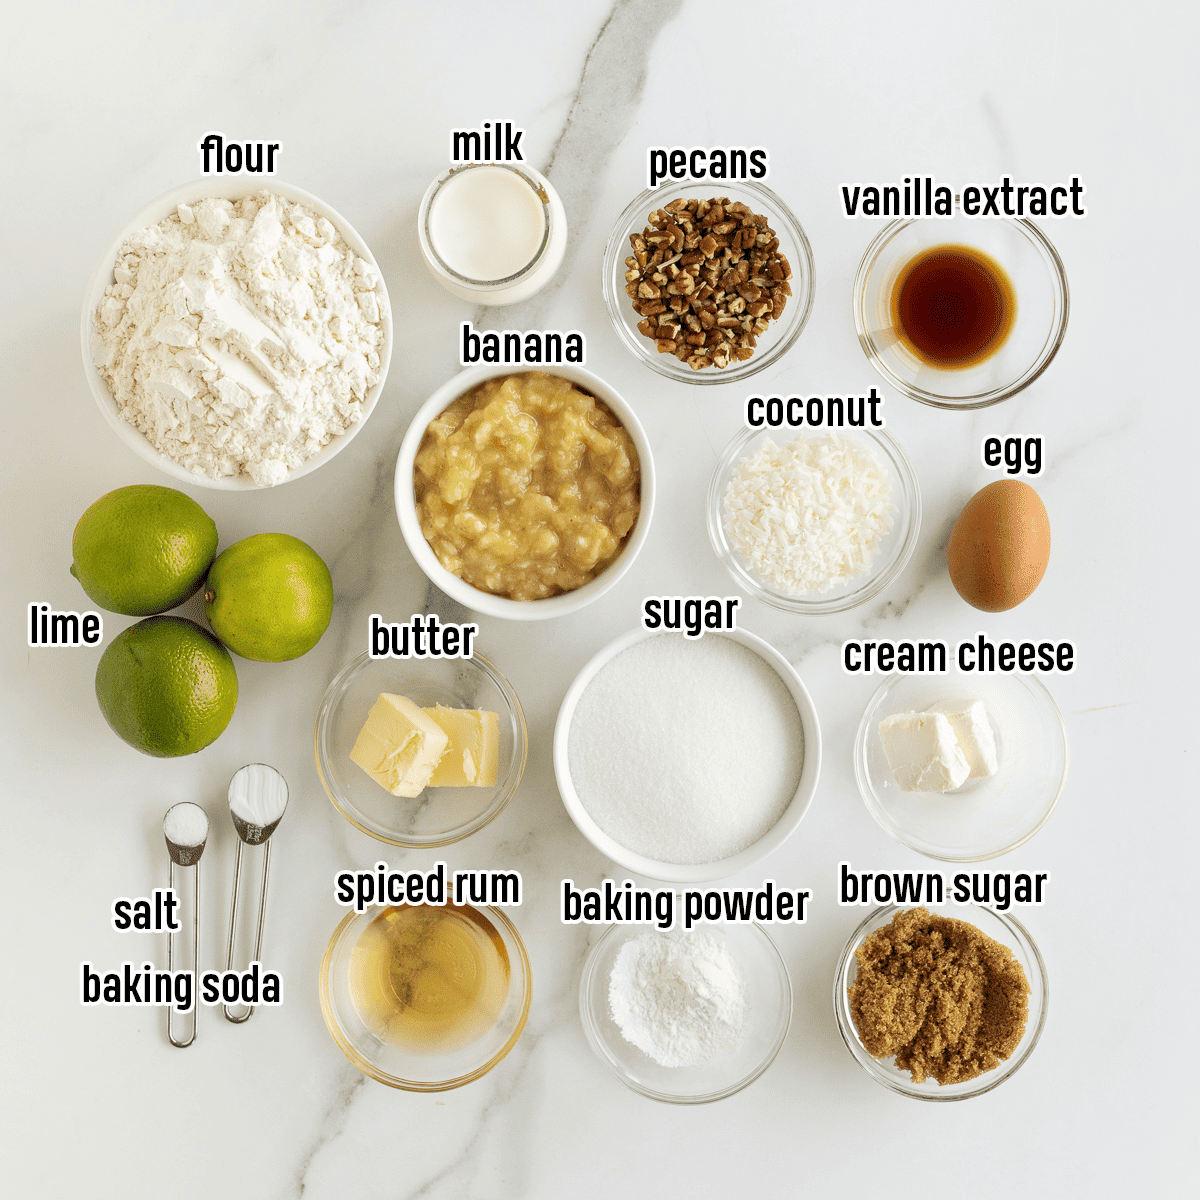 Flour, sugar, mashed banana and other ingredients in bowls with text.